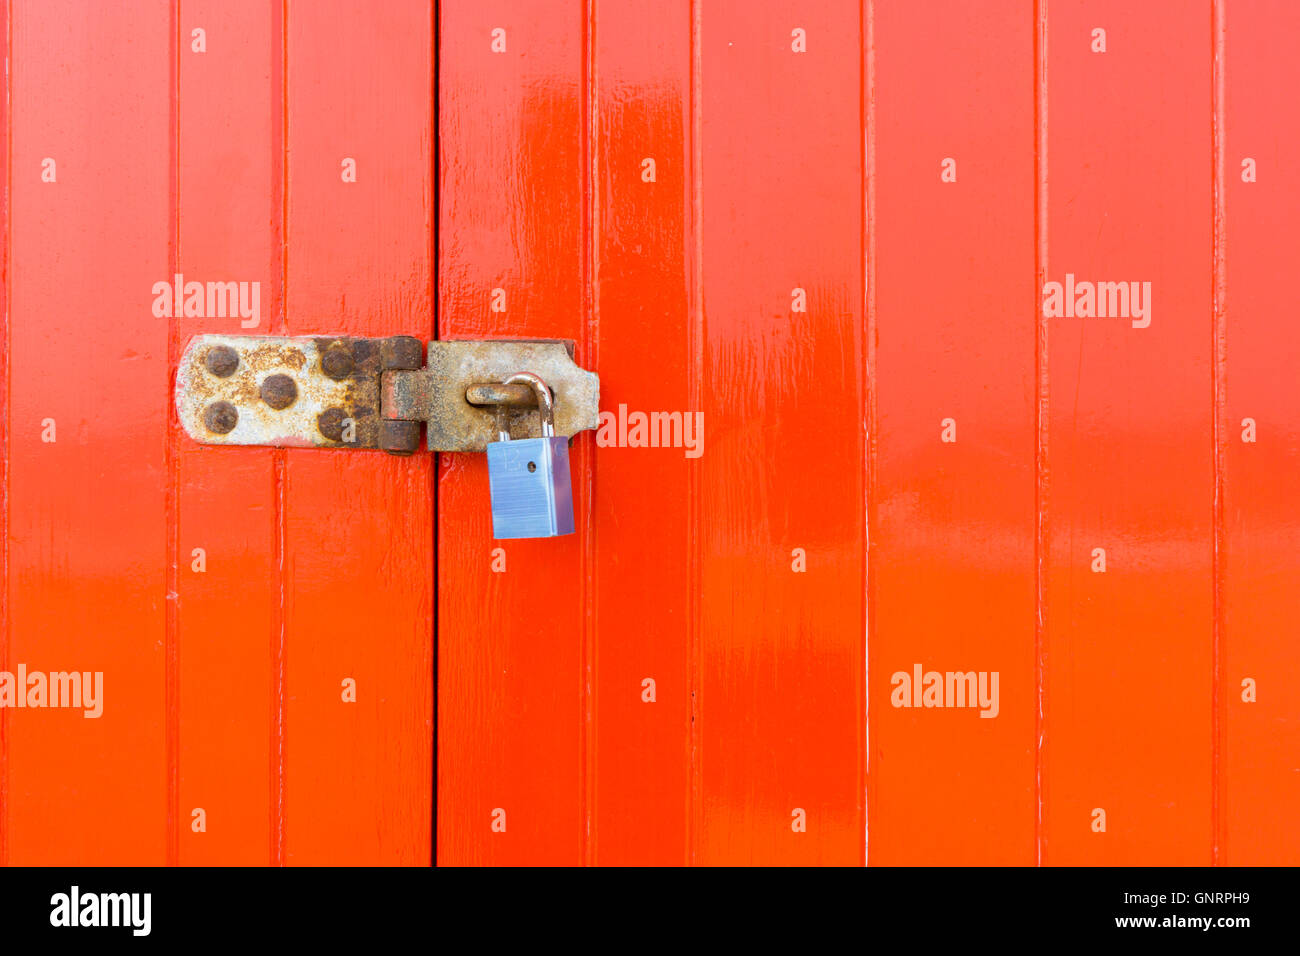 Padlock and latch on a bright red wooden closed door Stock Photo